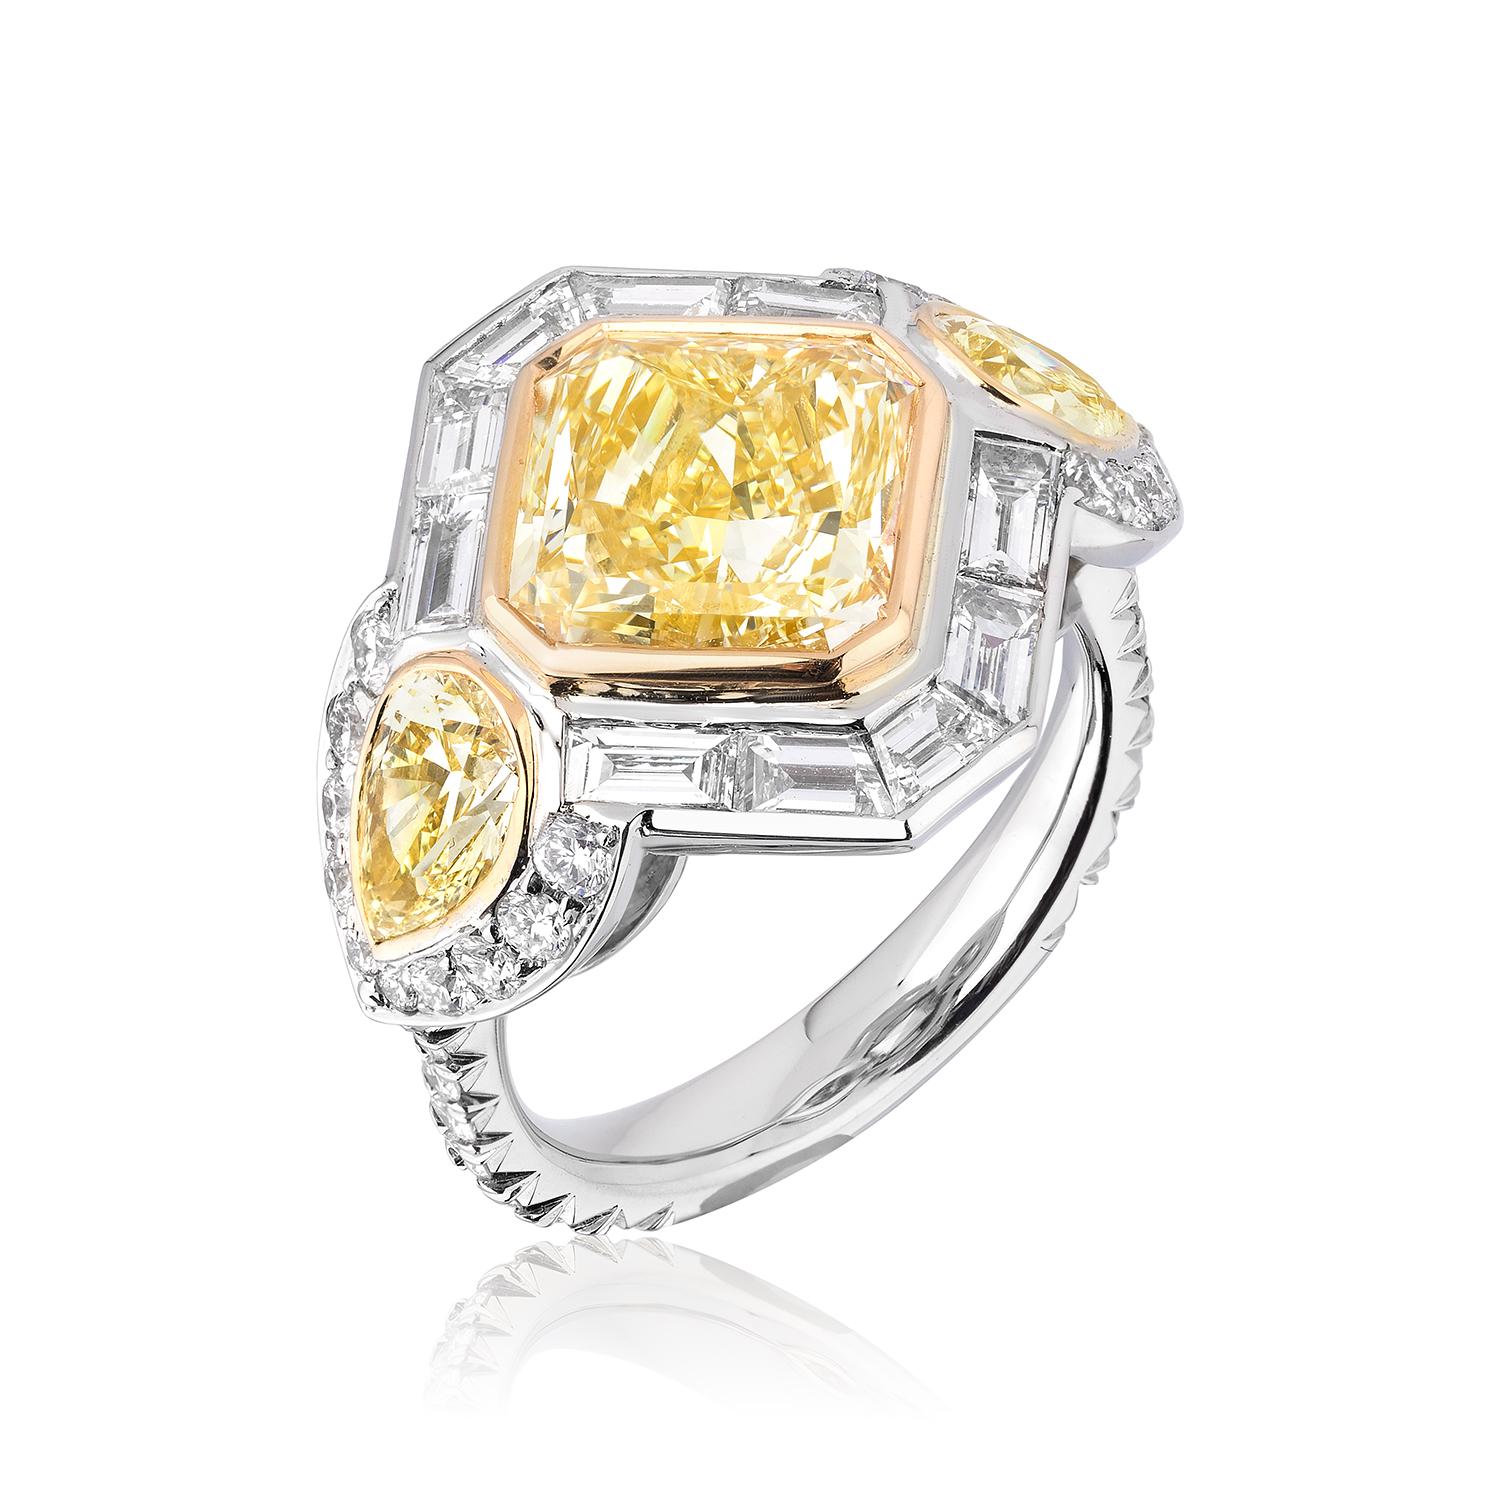 Gorgeous Yellow Diamond weighing 5.07 Carat with Yellow Pear Shaped Side Stones weighing 1.14 Carats.
White Diamond accents weigh 1.25 Carats.
Set in Platinum and 18 Karat Yellow Gold.
Size 6.